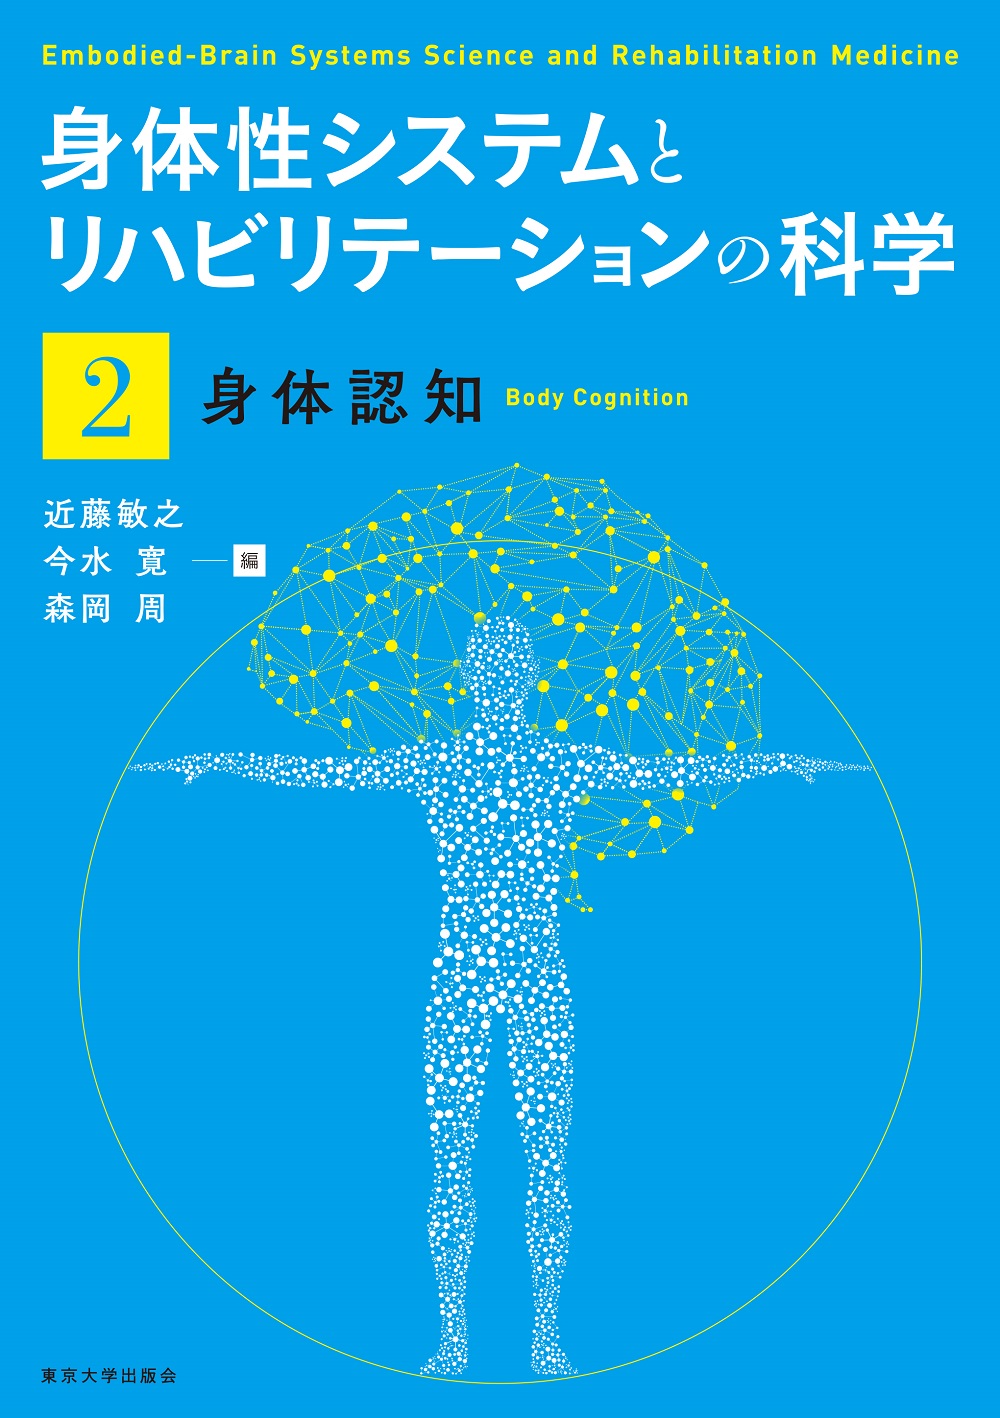 An illustration of human body on a light blue cover